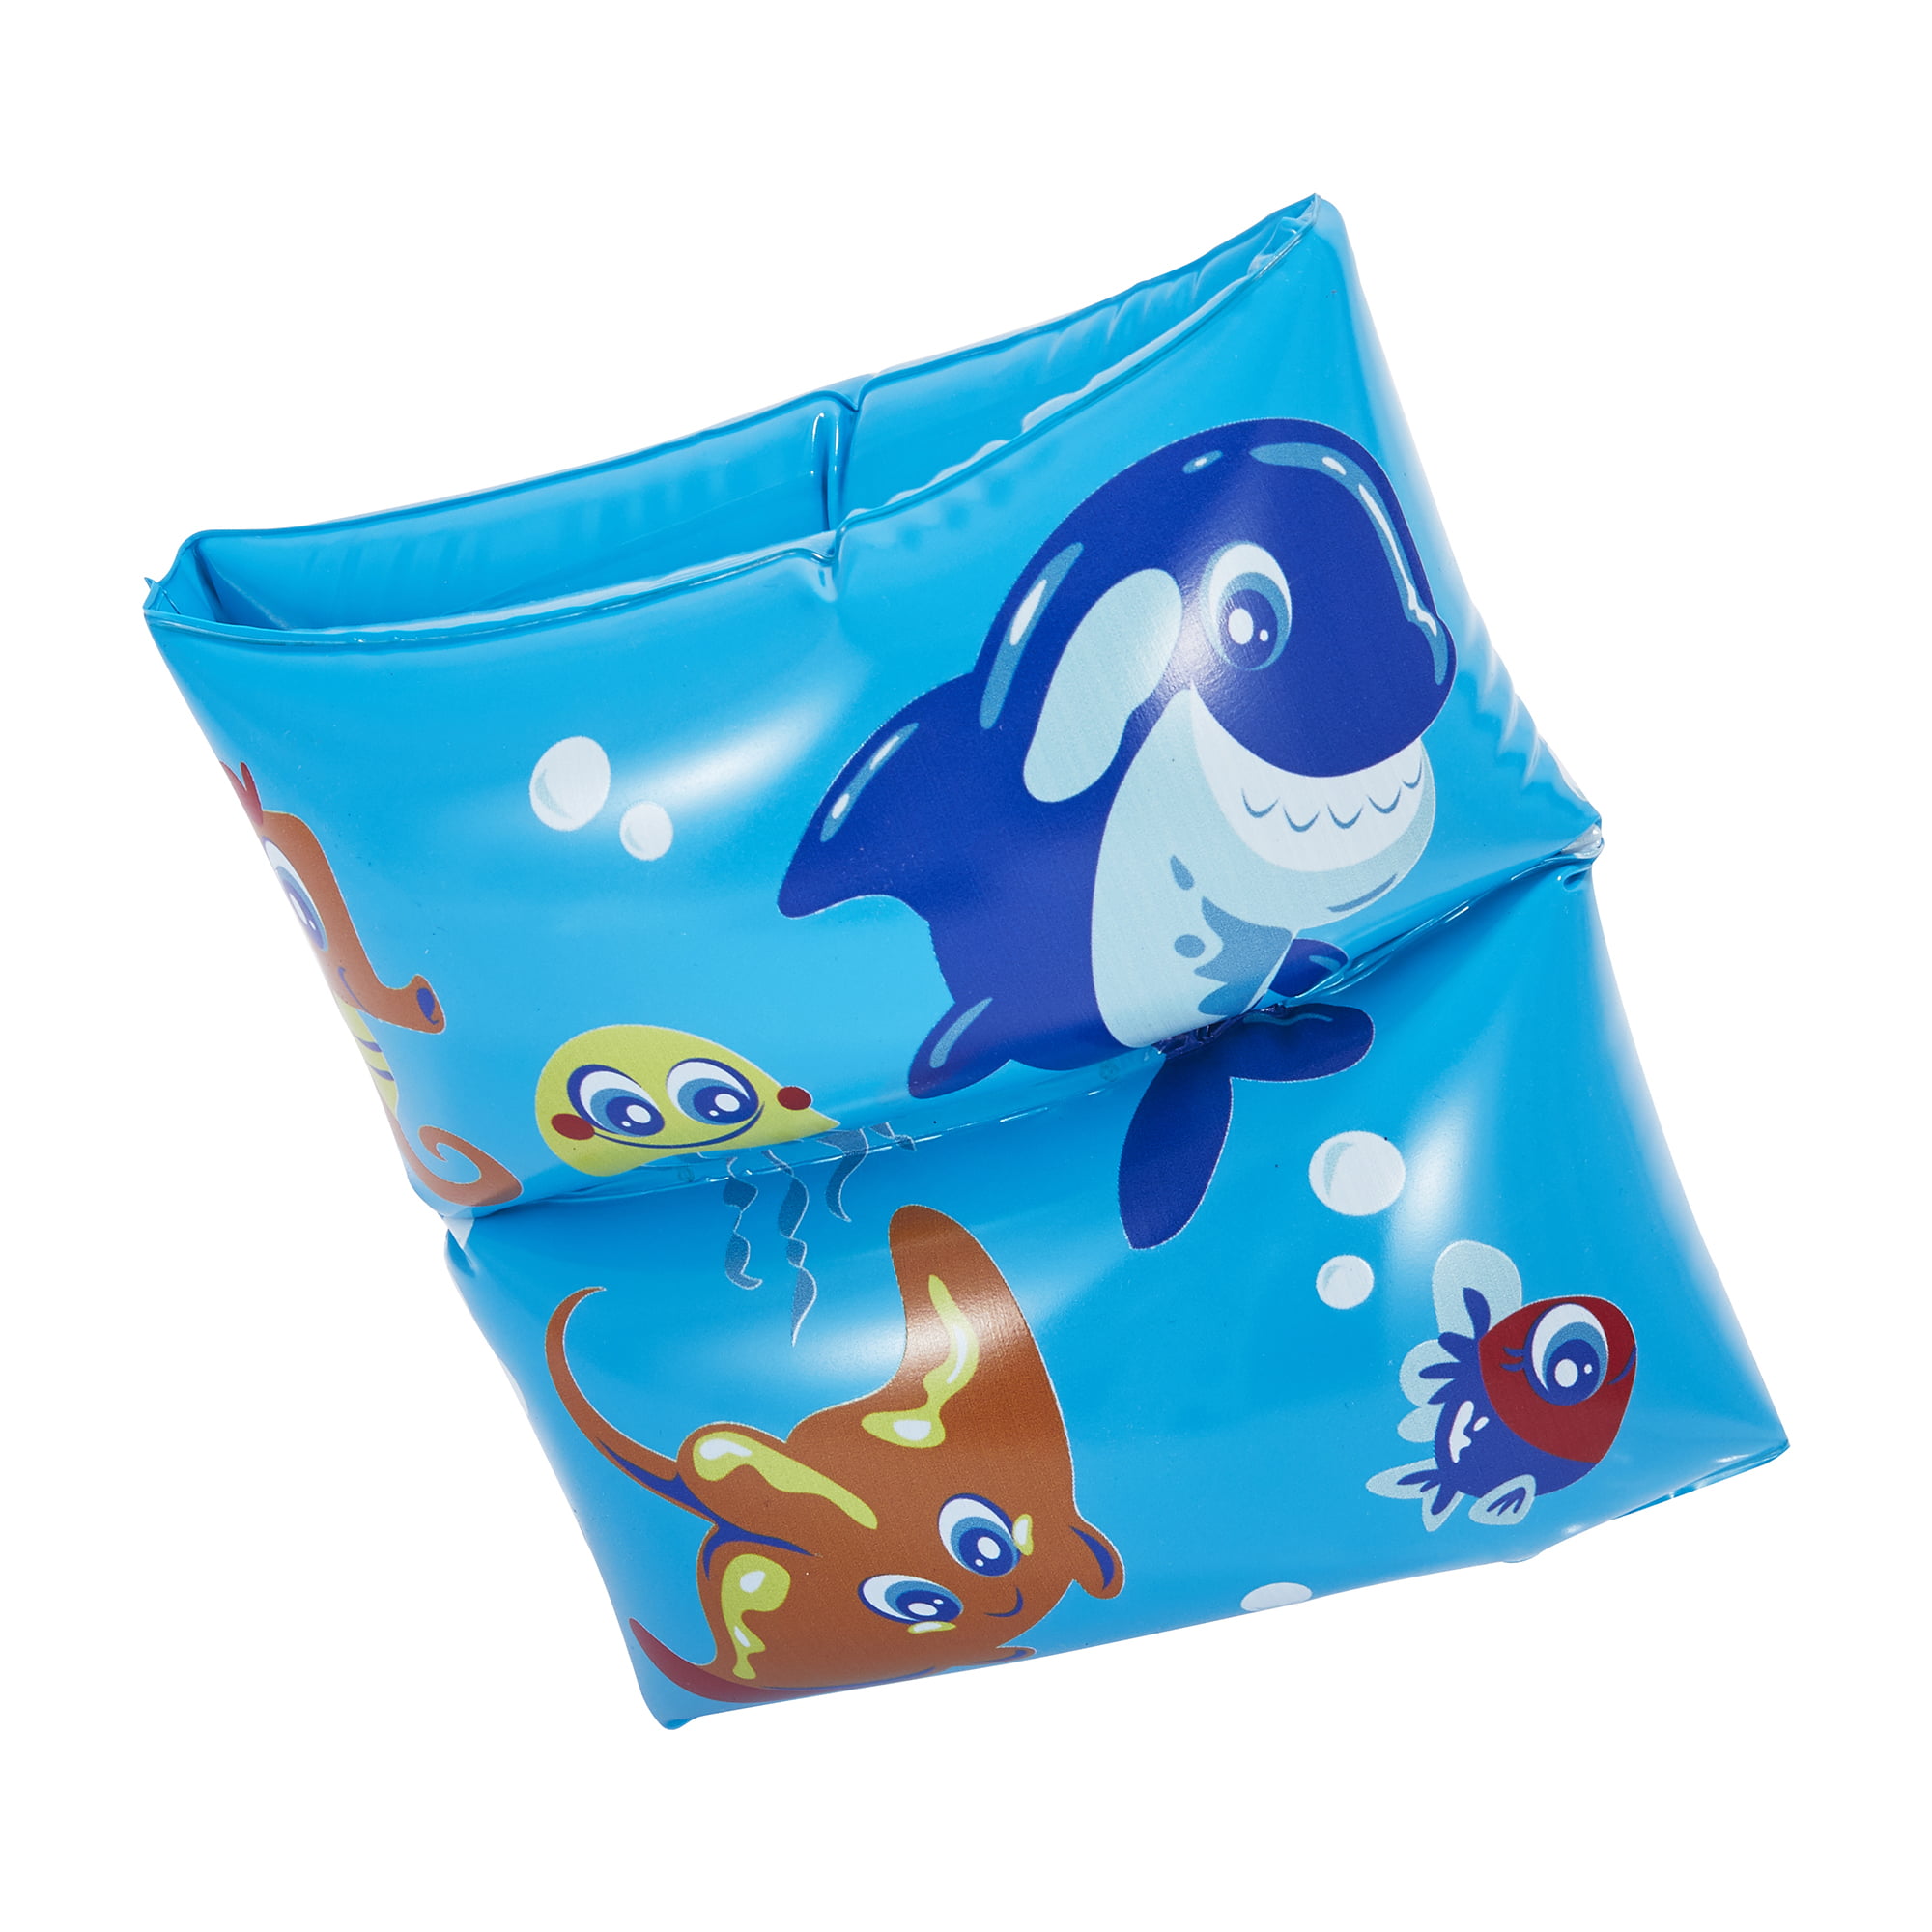 2 Play Day Inflatable Shark Printed Armbands in Blue Ages 3-6 1 Boys 1girls for sale online